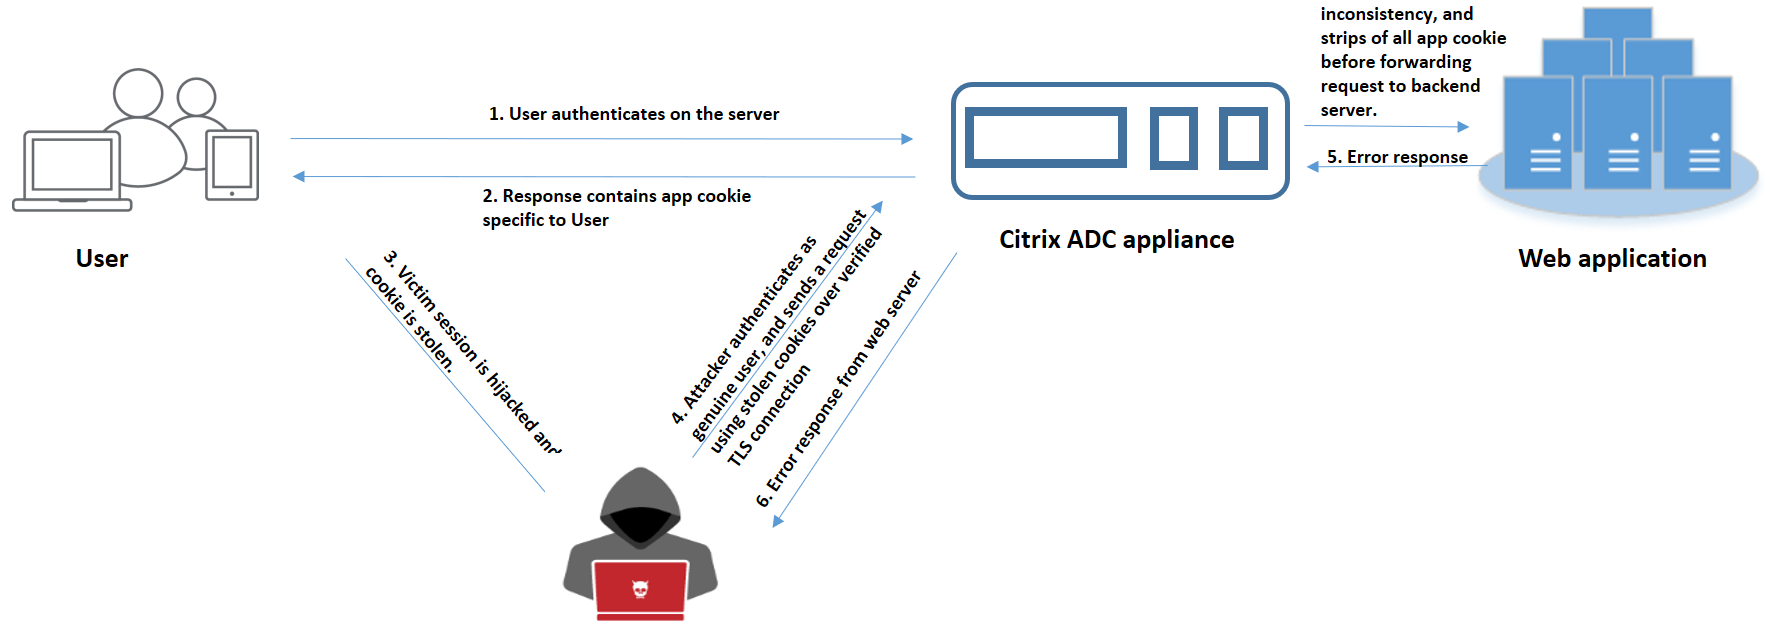 Cookie hijacking attack use case 4: attacker impersonates as authenticated user 